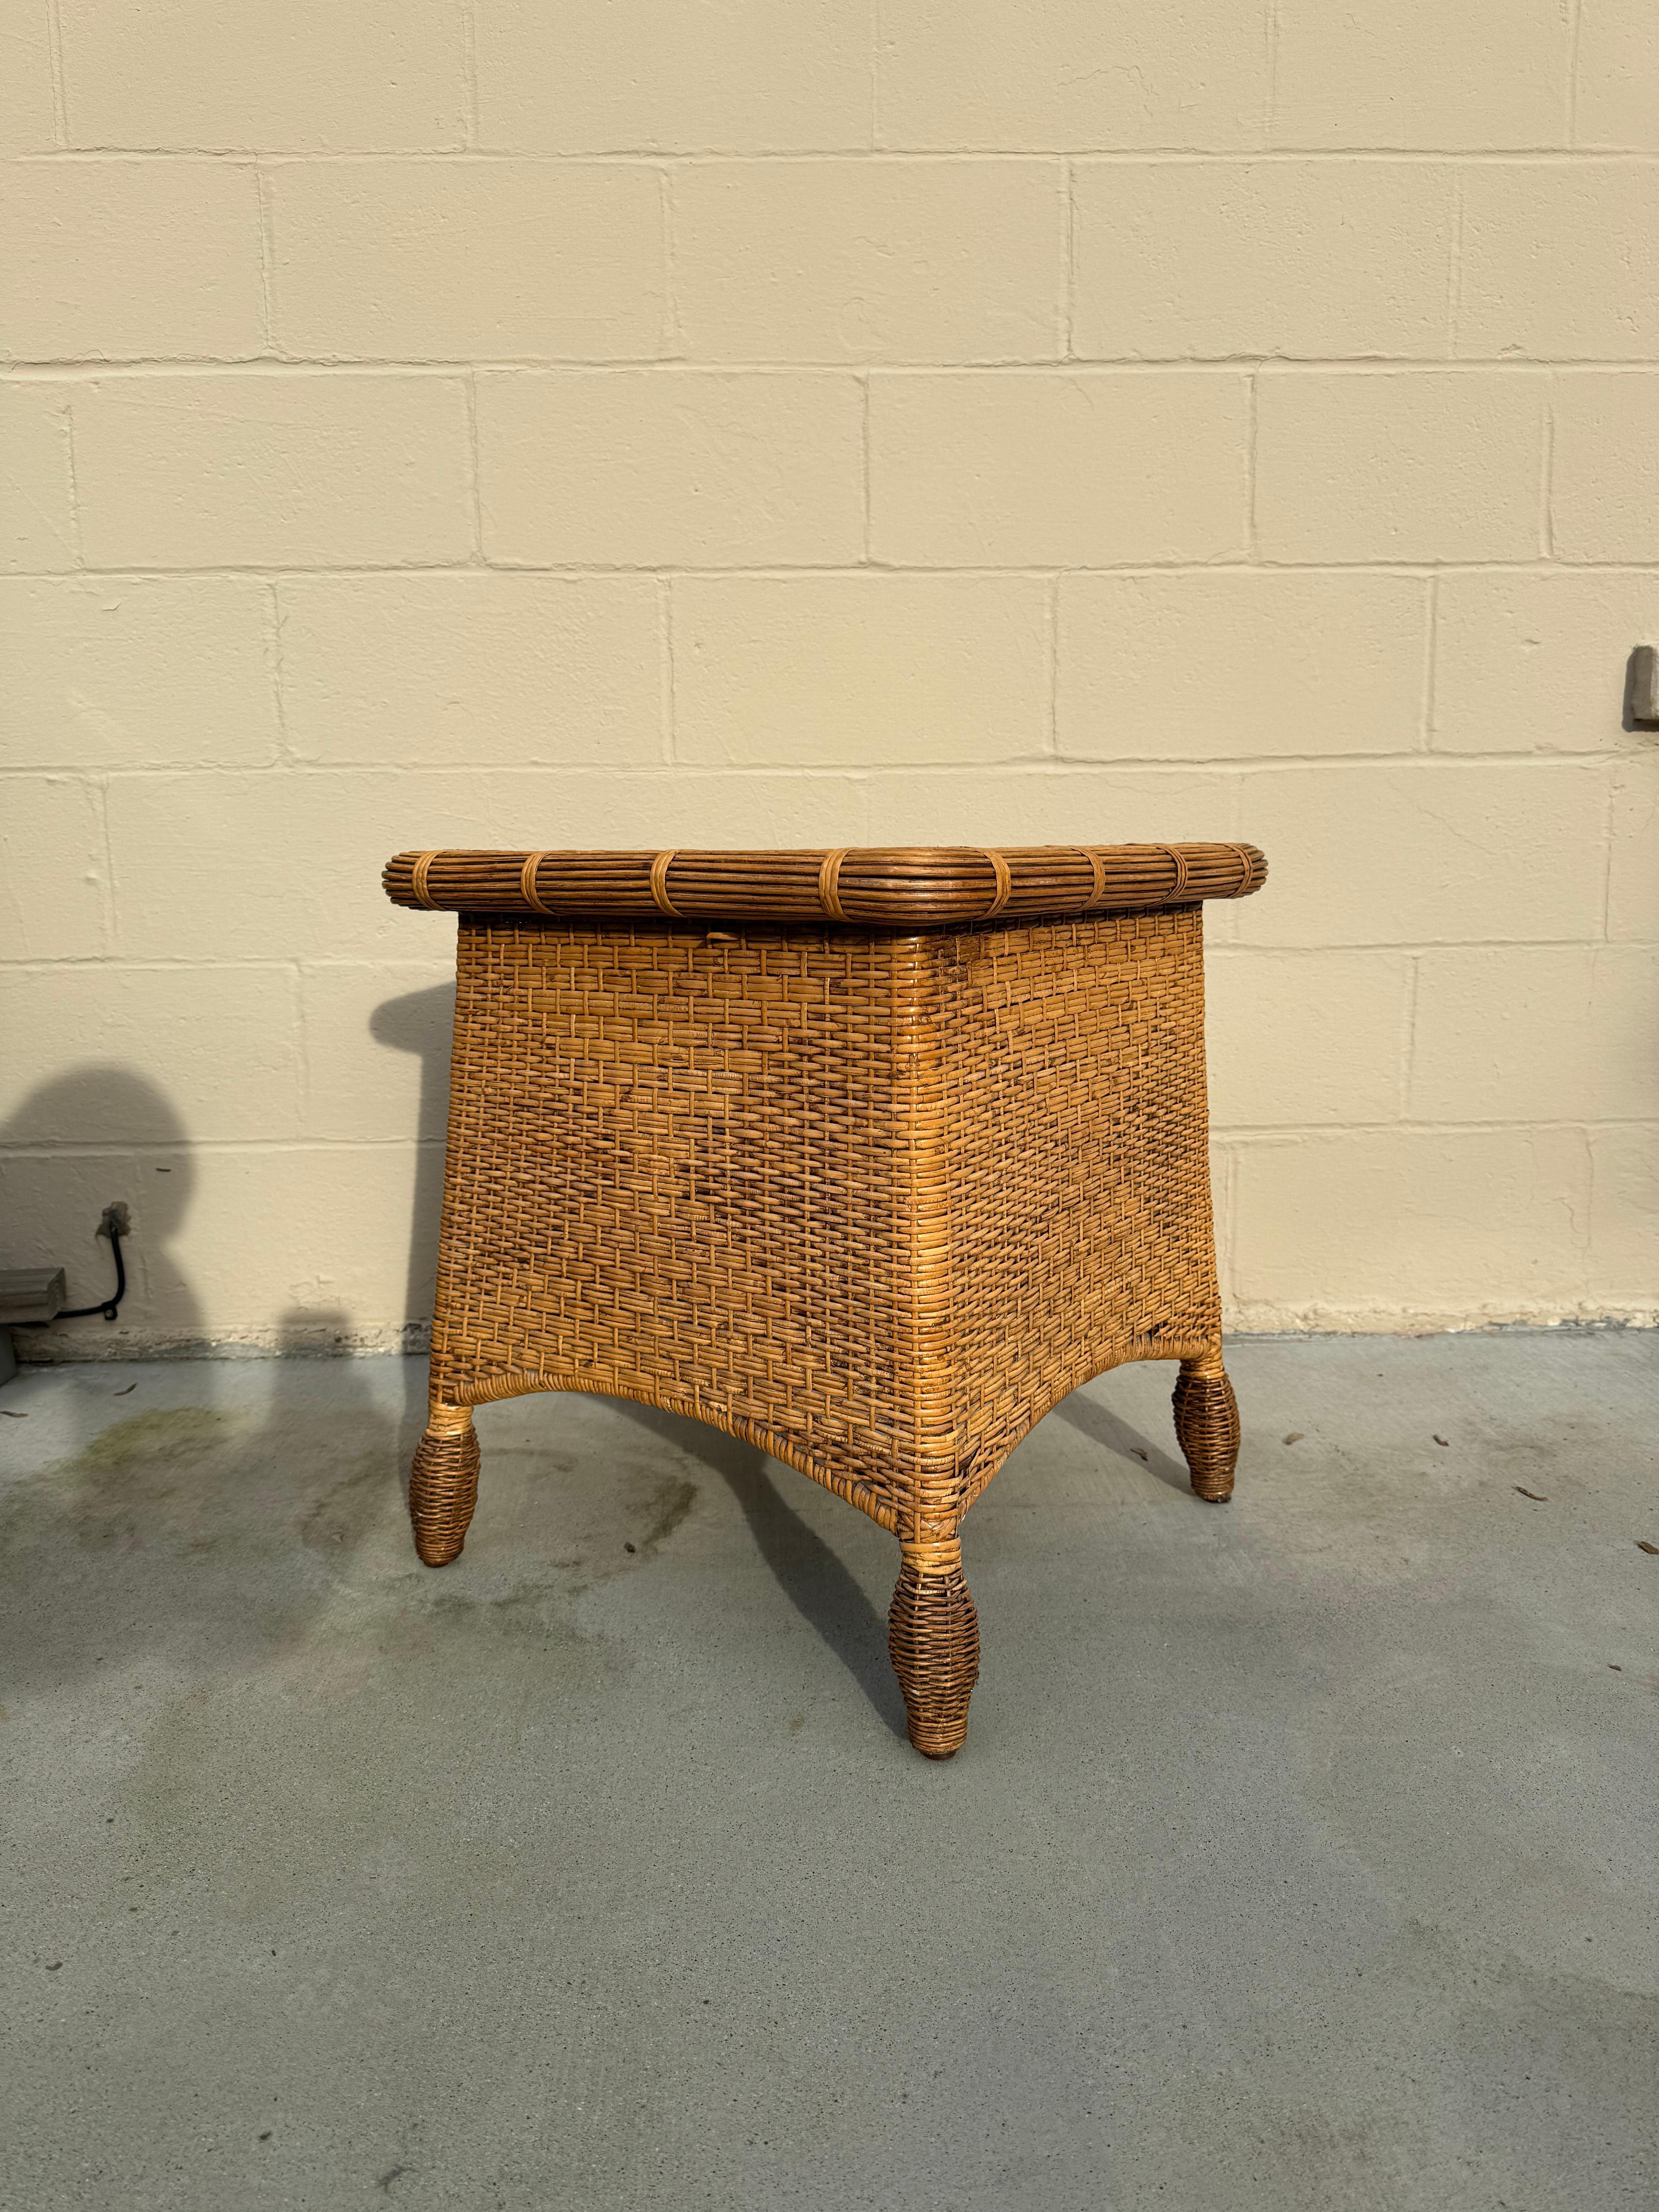 Discover the perfect blend of mid-century elegance and boho chic vibes with our exquisite woven wicker or rattan side table! This stunning piece is a true testament to craftsmanship, boasting intricate details and style that will infuse warmth into